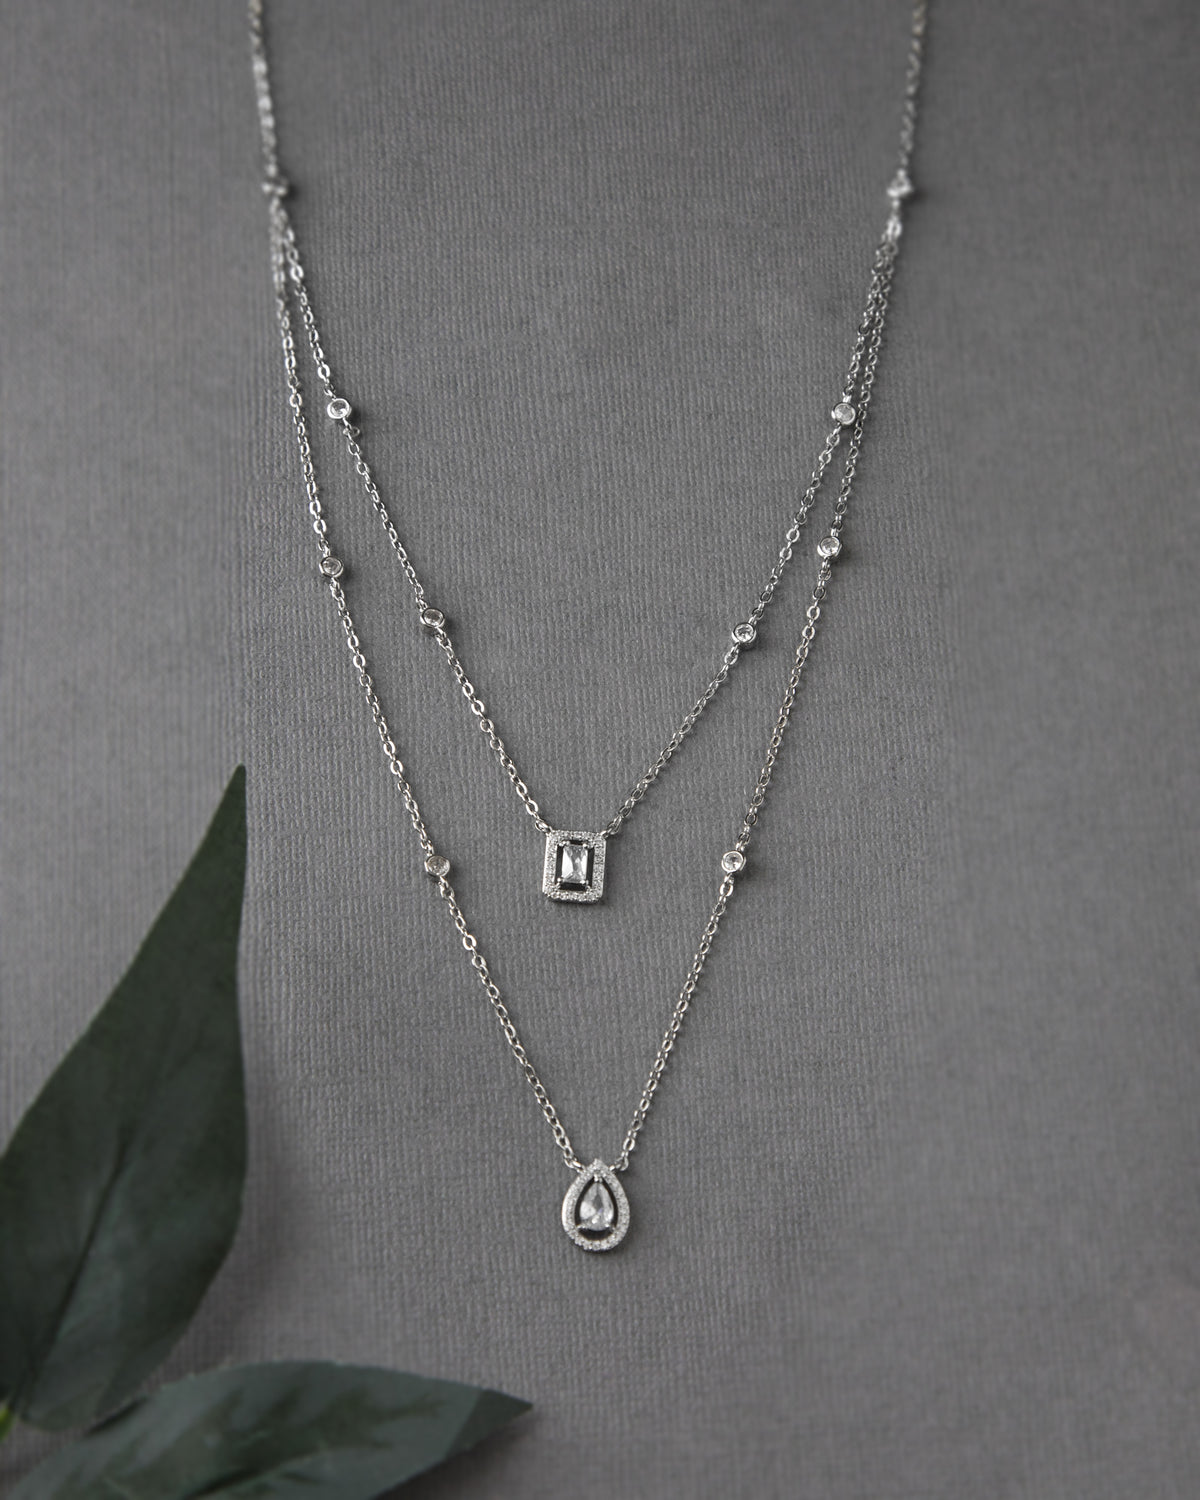 Simple Layered Necklace with CZ Stones